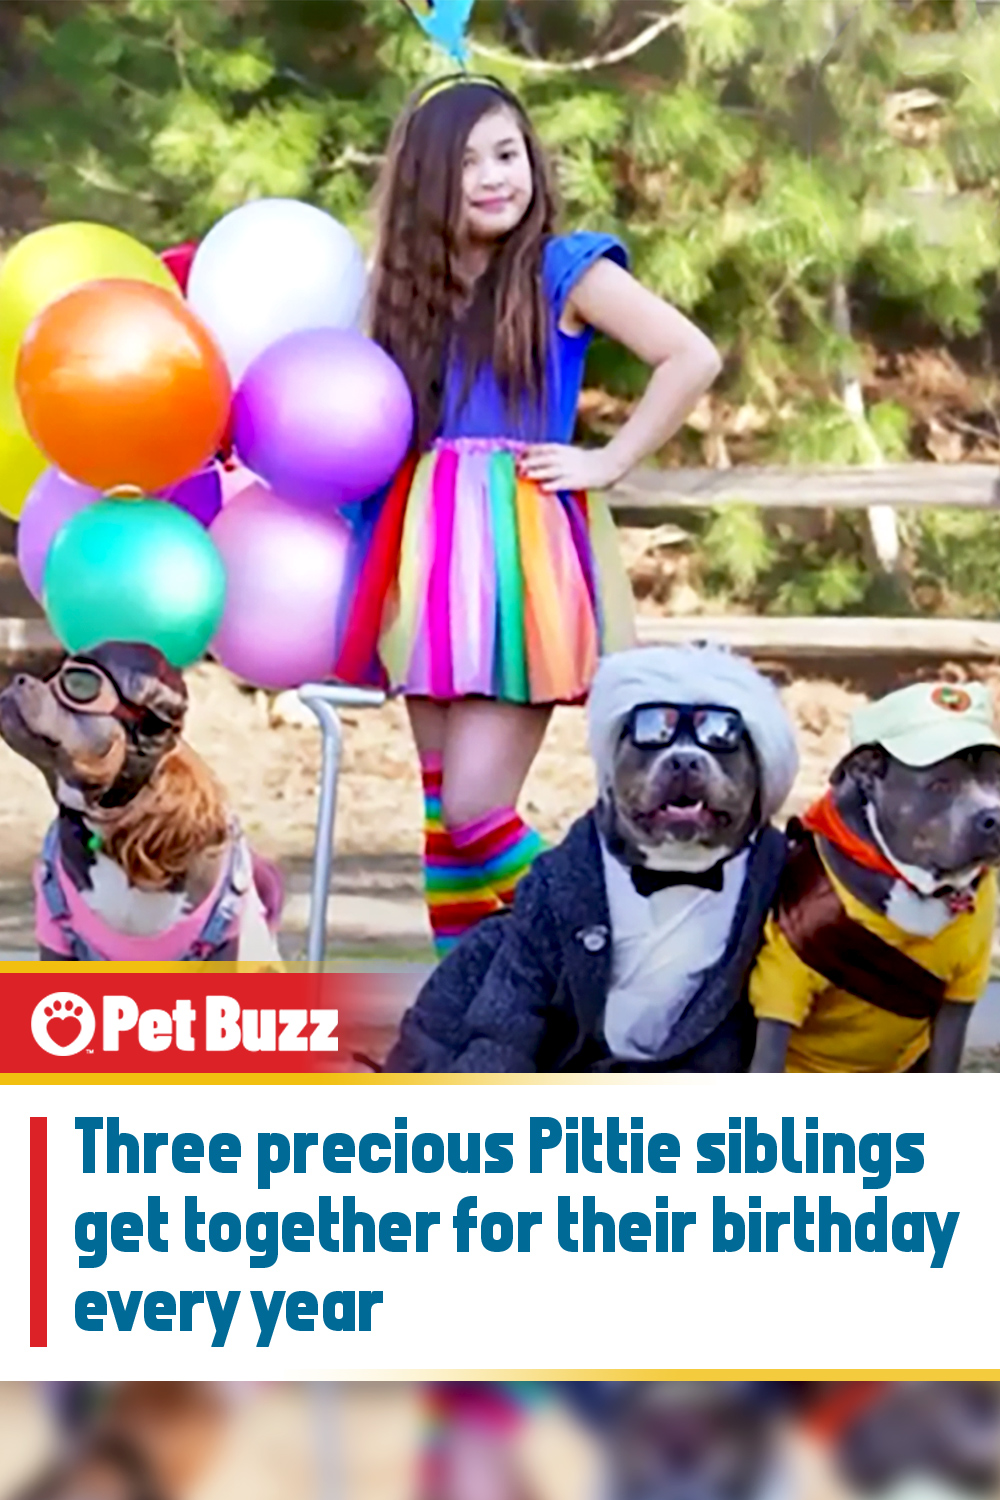 Three precious Pittie siblings get together for their birthday every year